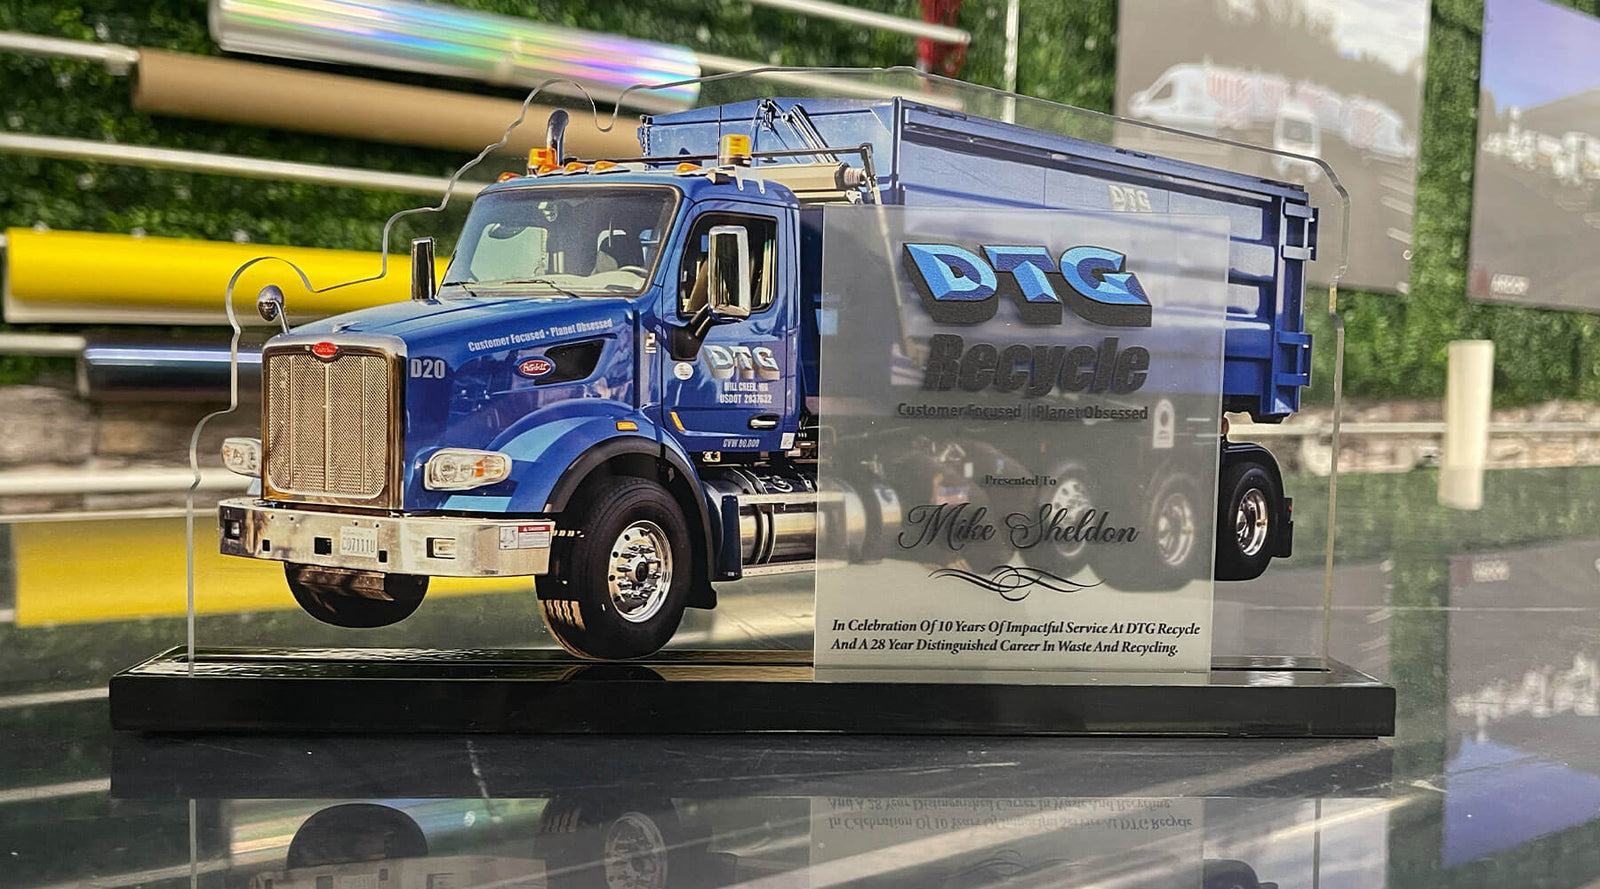 Award plaque featuring a blue DTG Recycle Peterbilt dump truck printed on glass using flatbed printing technology